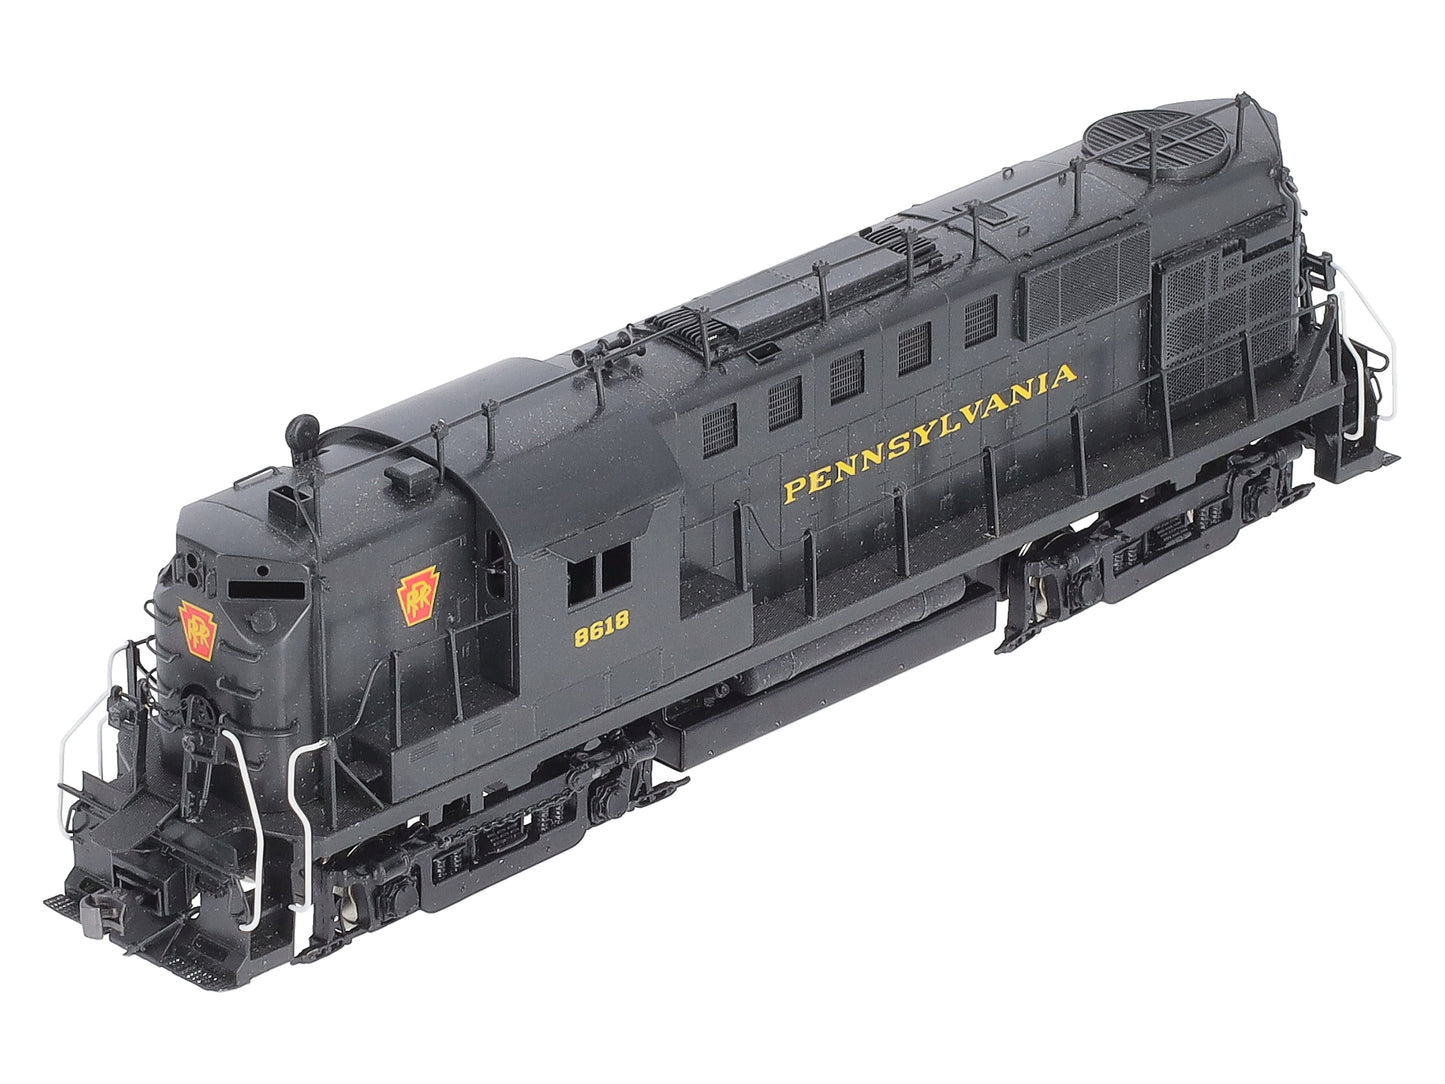 Key Imports HO BRASS PRR Alco RS-11 (DL-701) Diesel Locomotive -Painted VG/Box